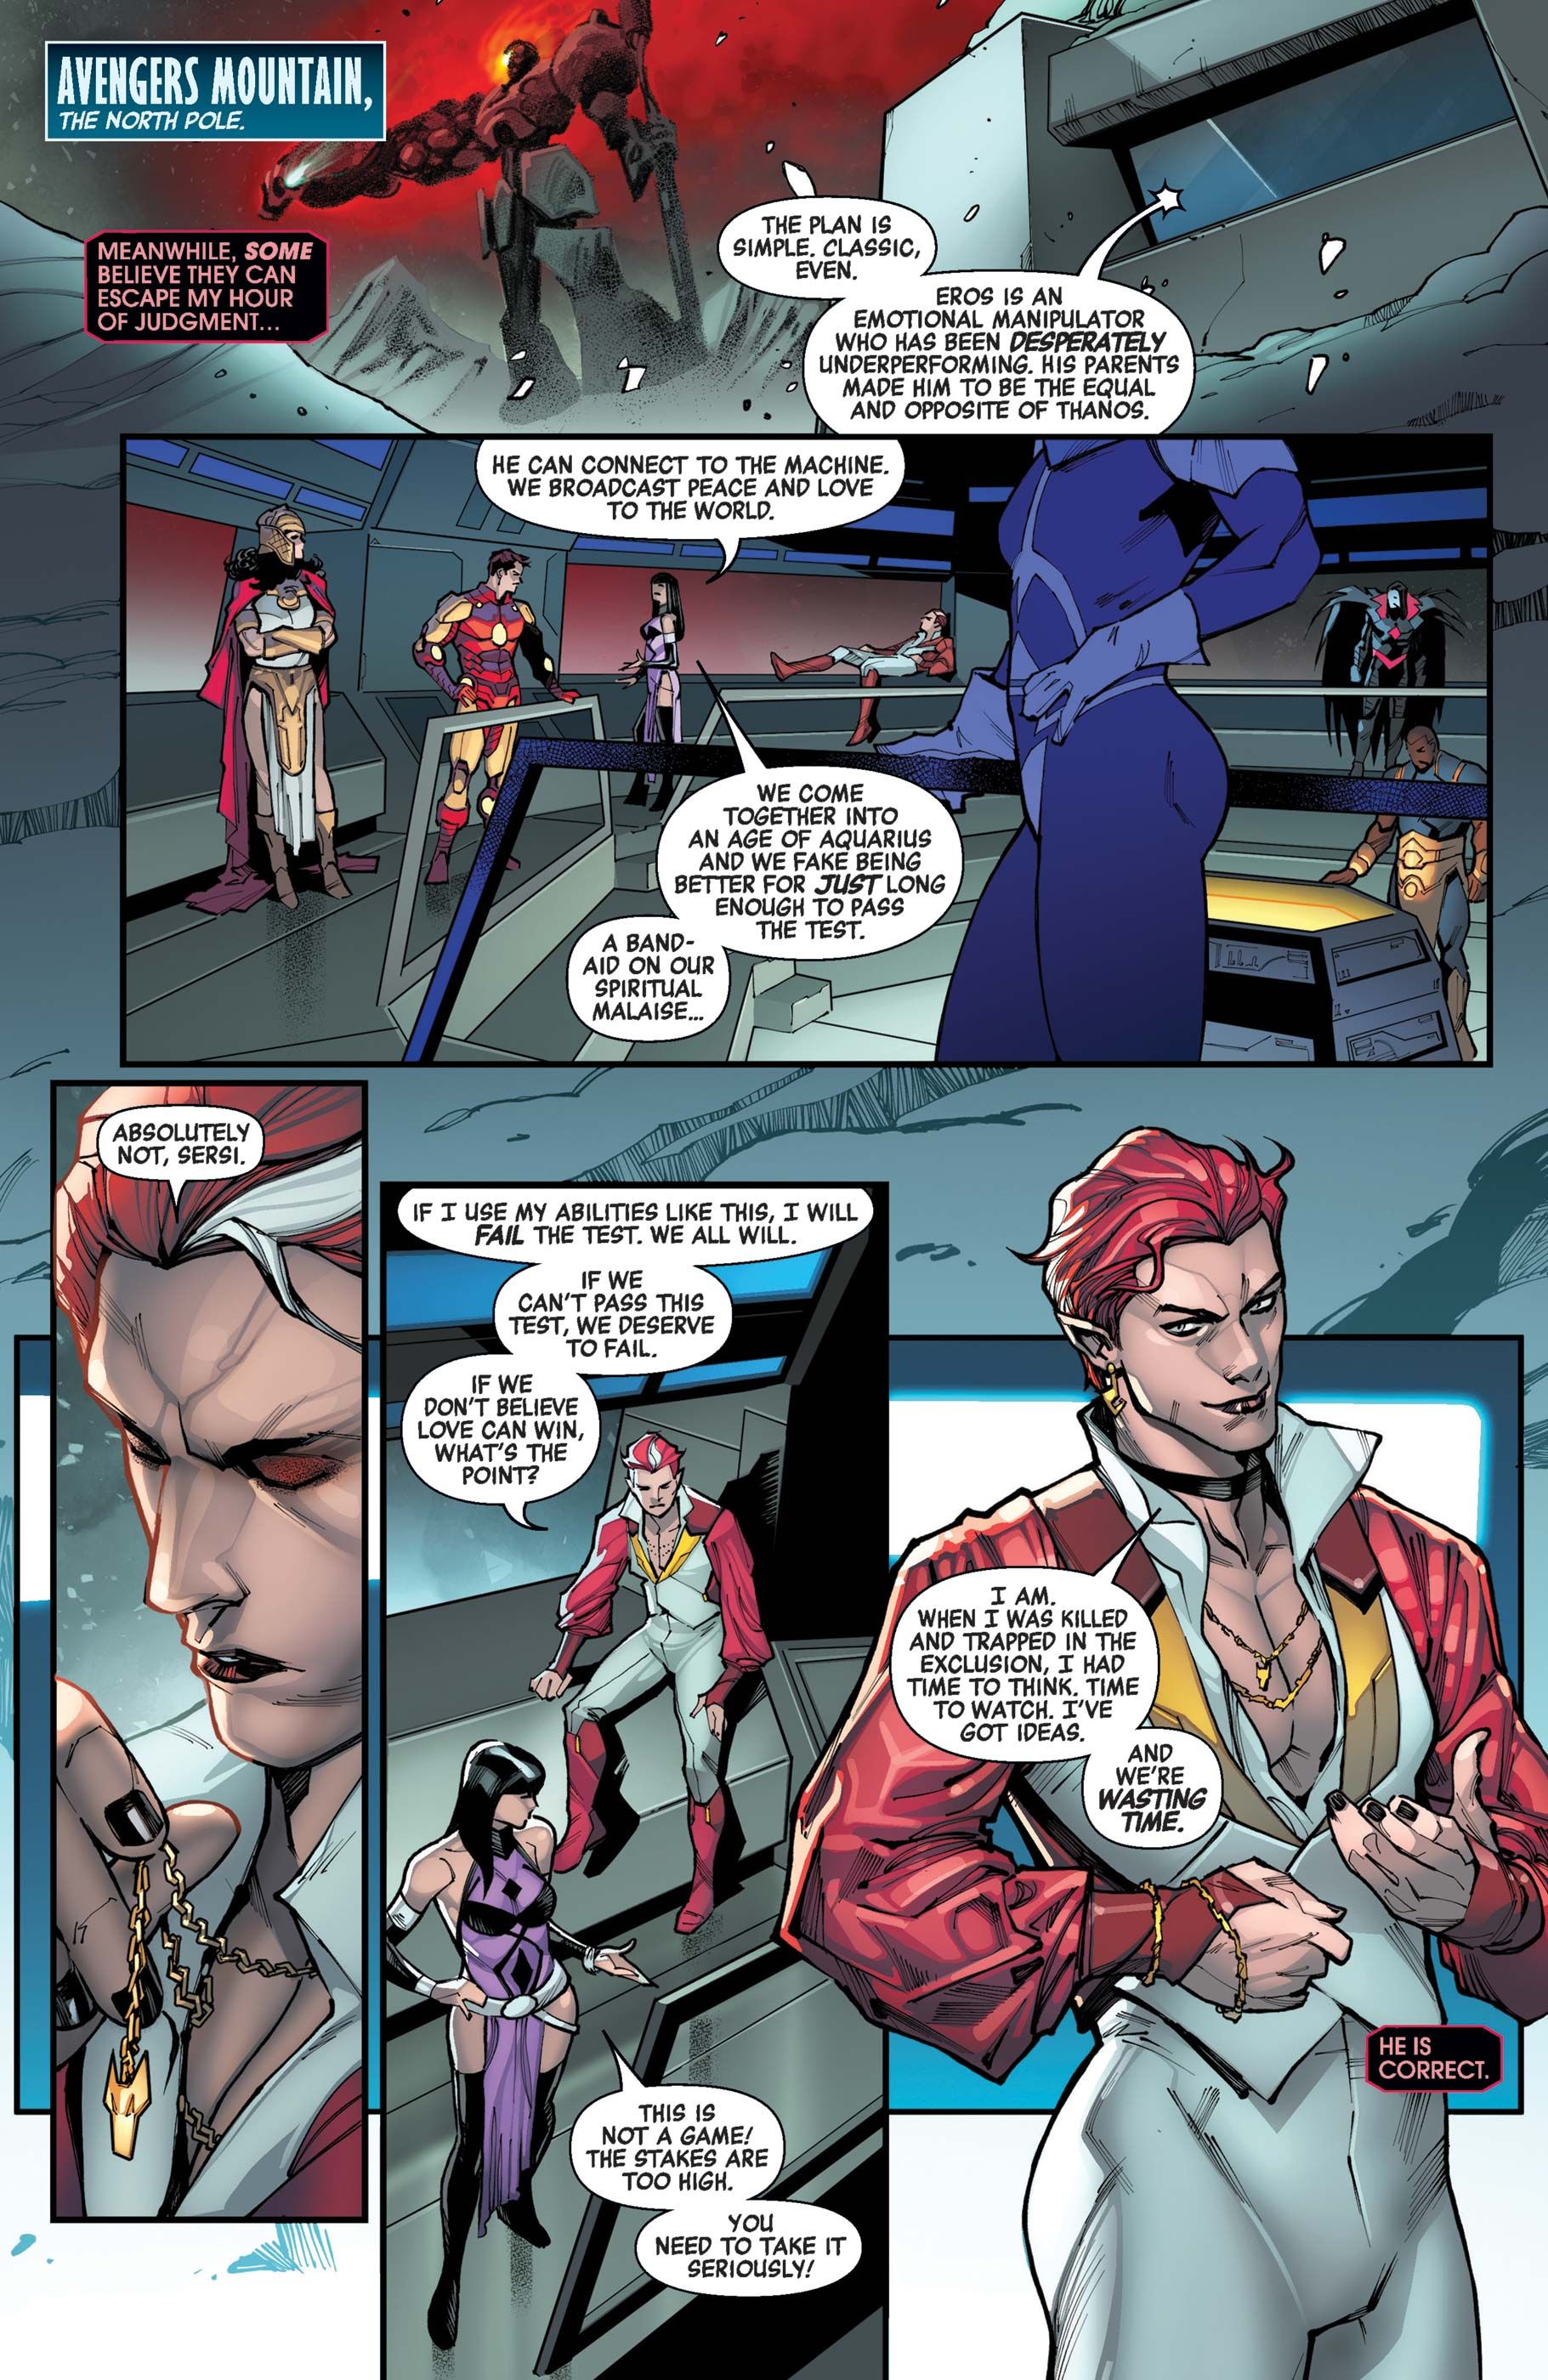 Starfox refuses to use his powers to manipulate people in A.X.E. Judgment Day #4